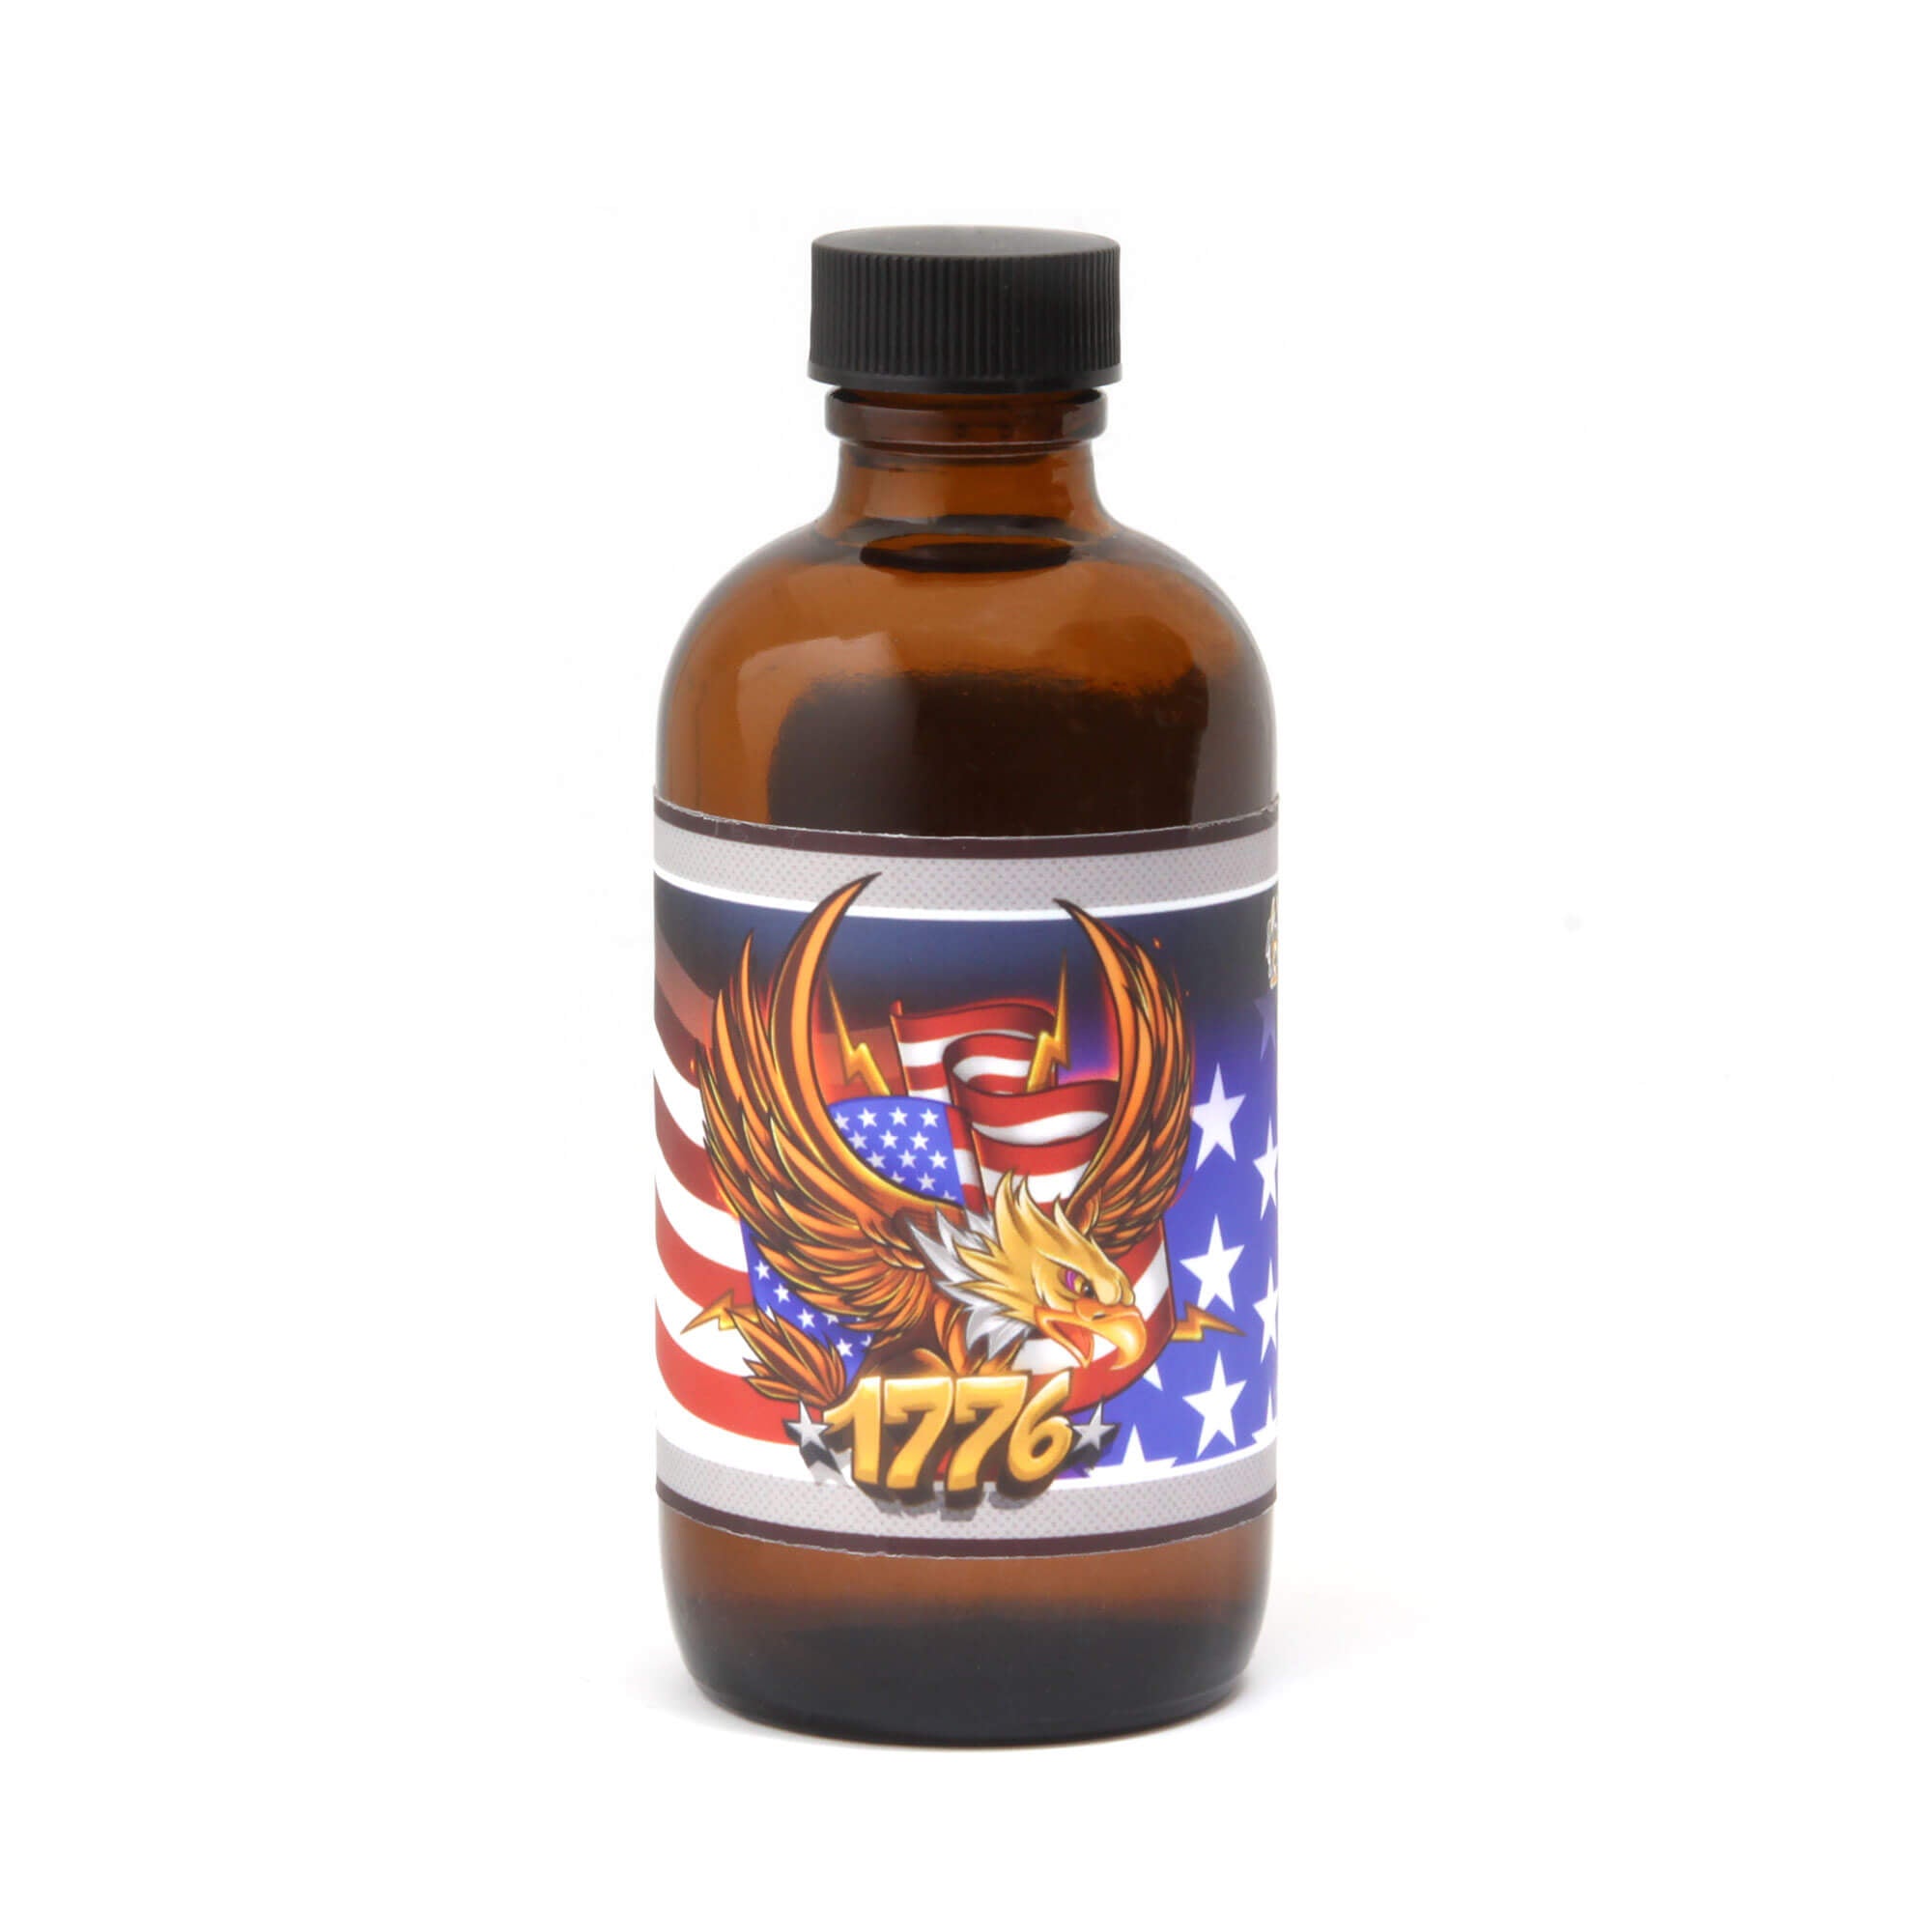 Wholly Kaw 1776 Aftershave Splash